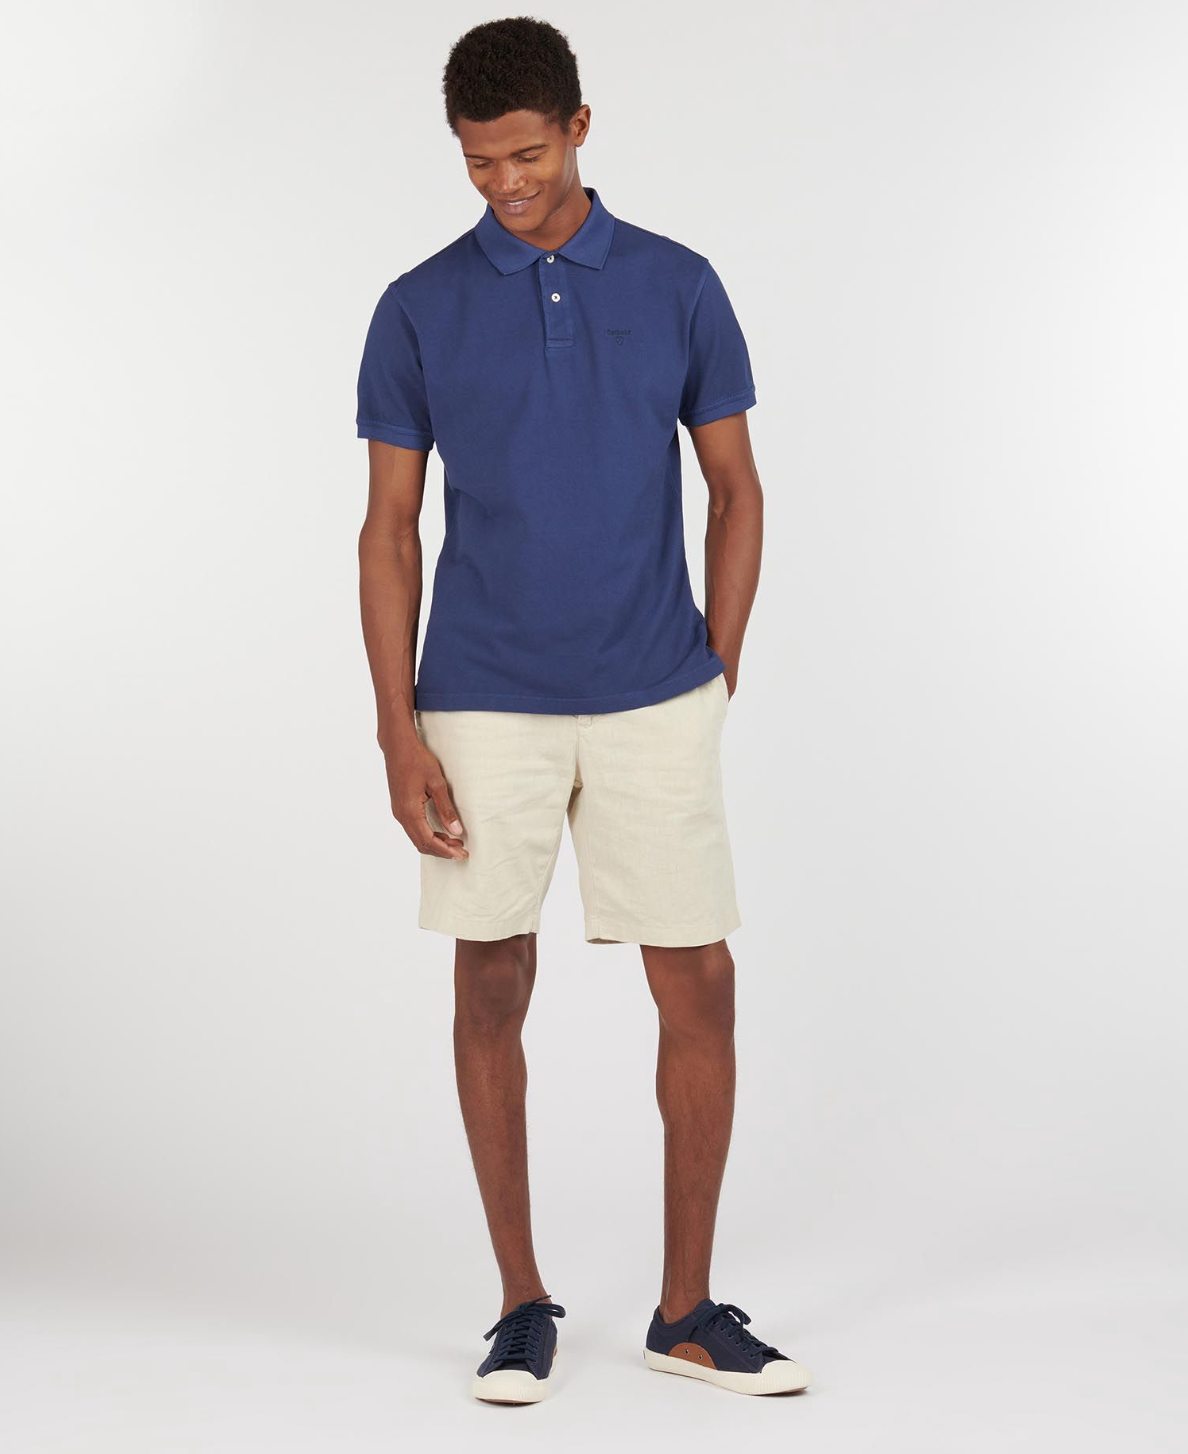 Barbour Men's Washed Sports Polo